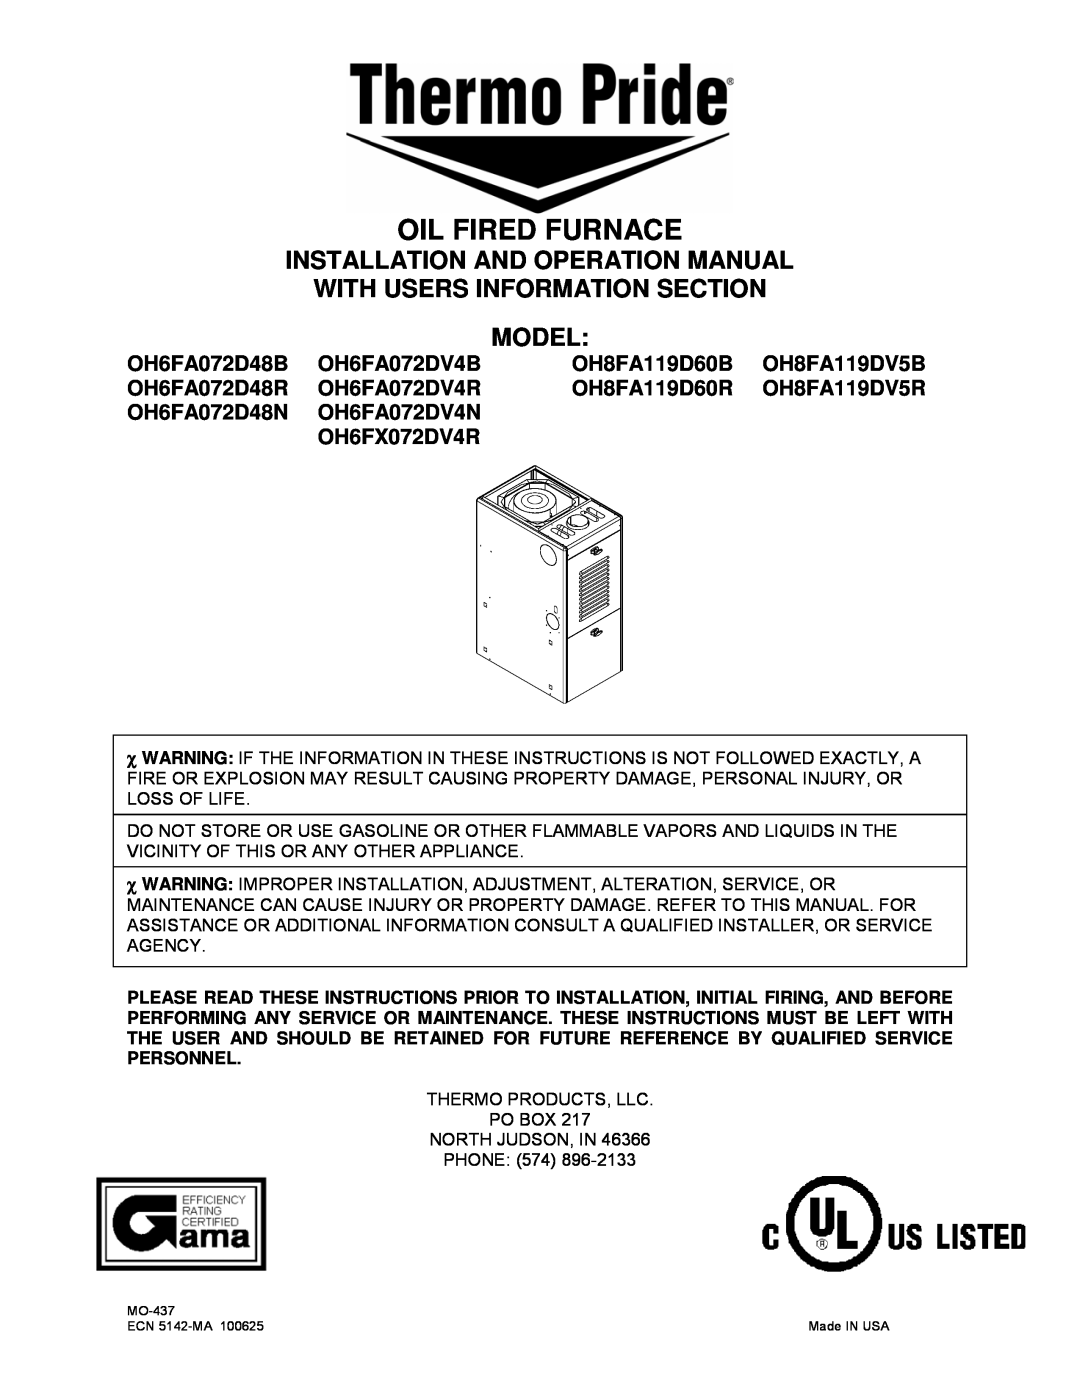 Thermo Products OH8FA119D60R operation manual OH6FA072D48B, OH6FA072DV4B, OH8FA119D60B, OH6FA072D48R, OH6FA072DV4R 